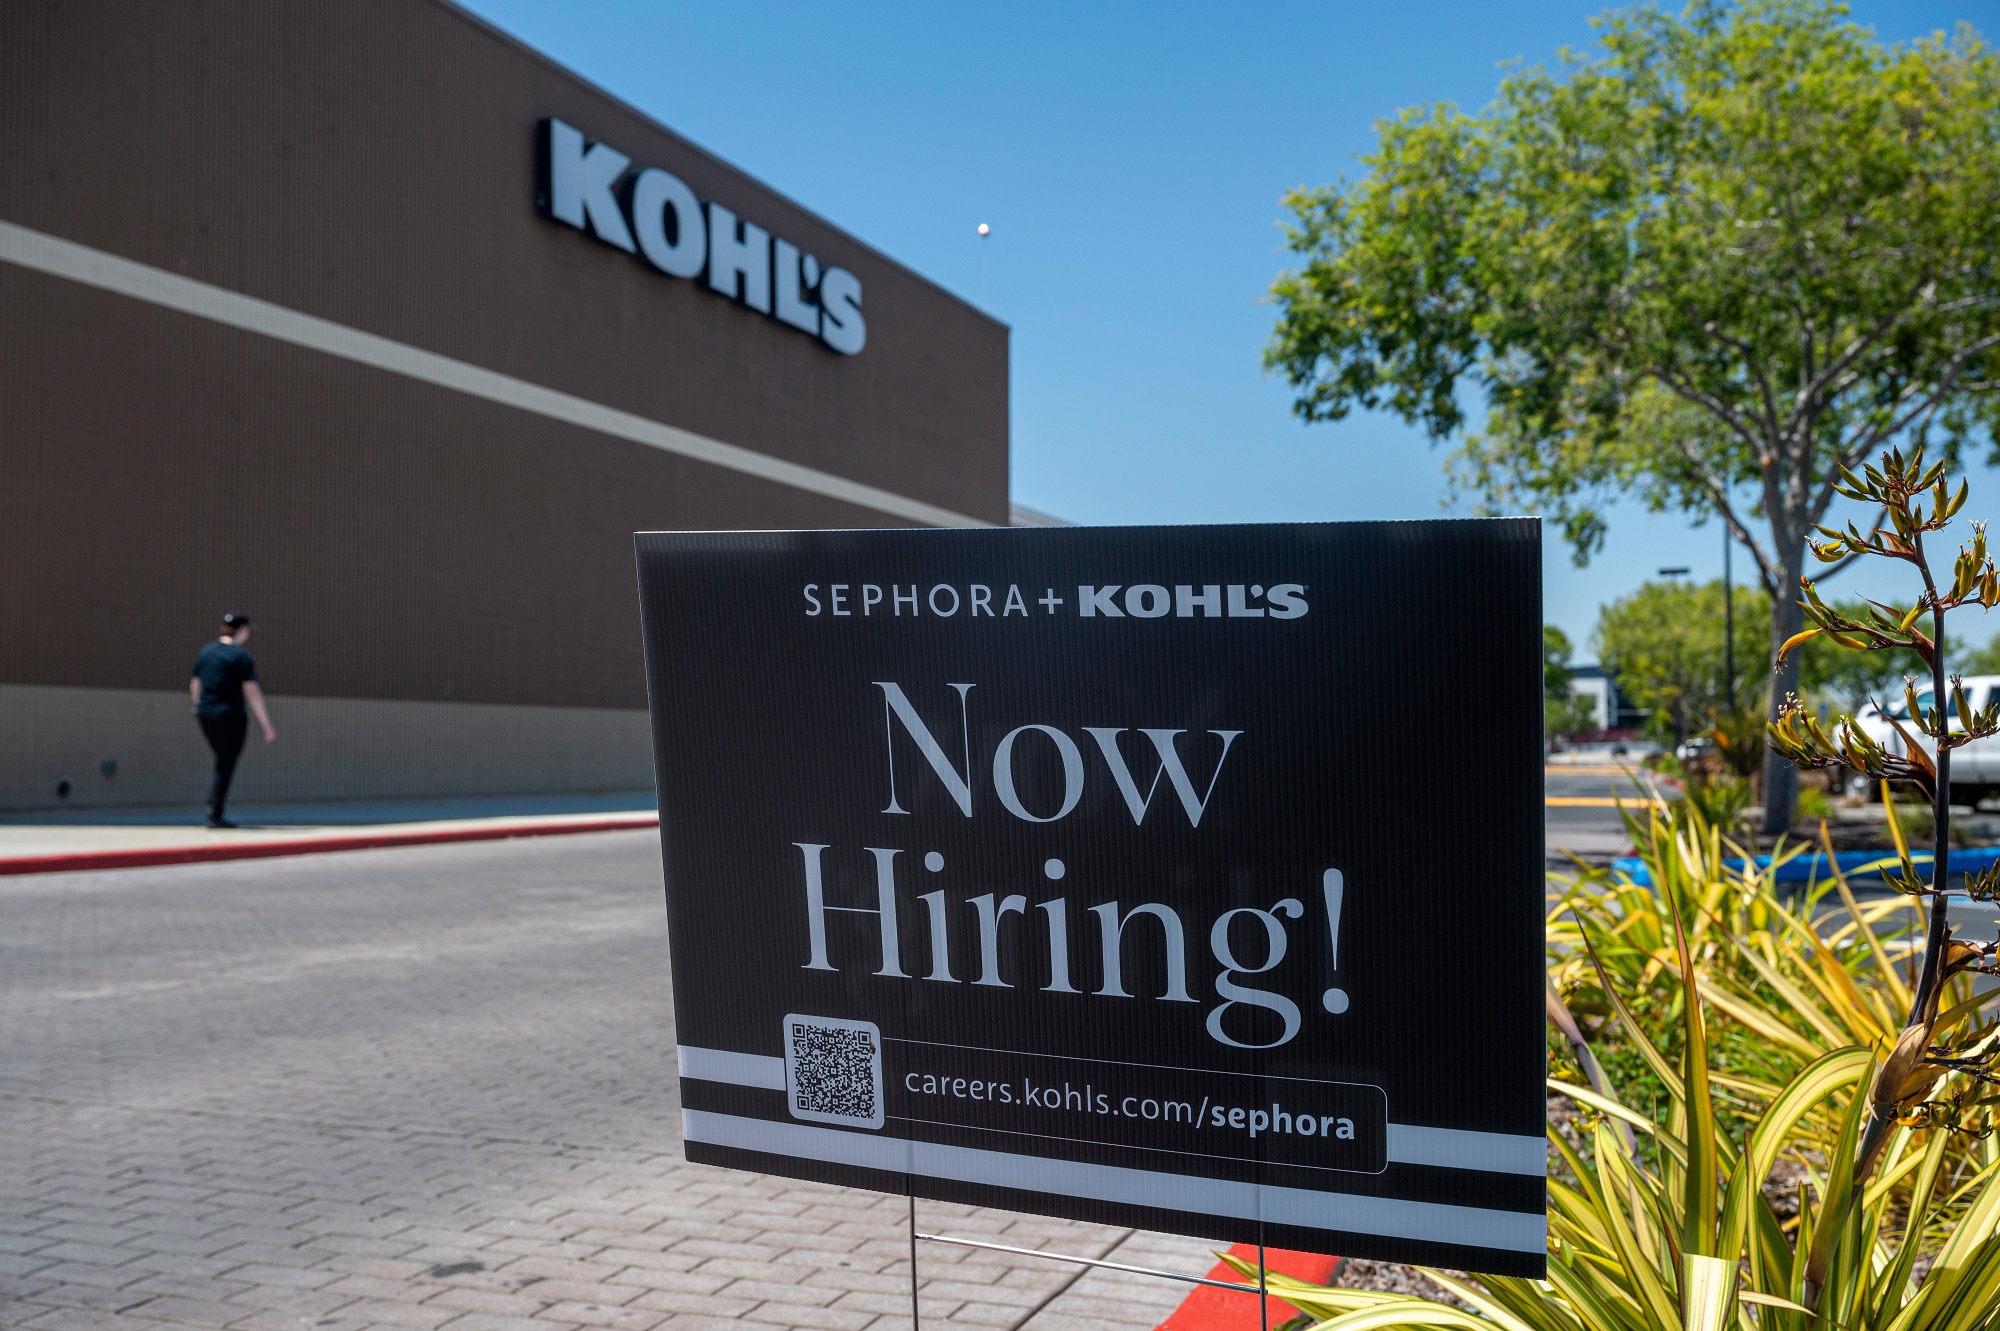 Kohl's forges ahead with slow but steady growth, kohl's hours 